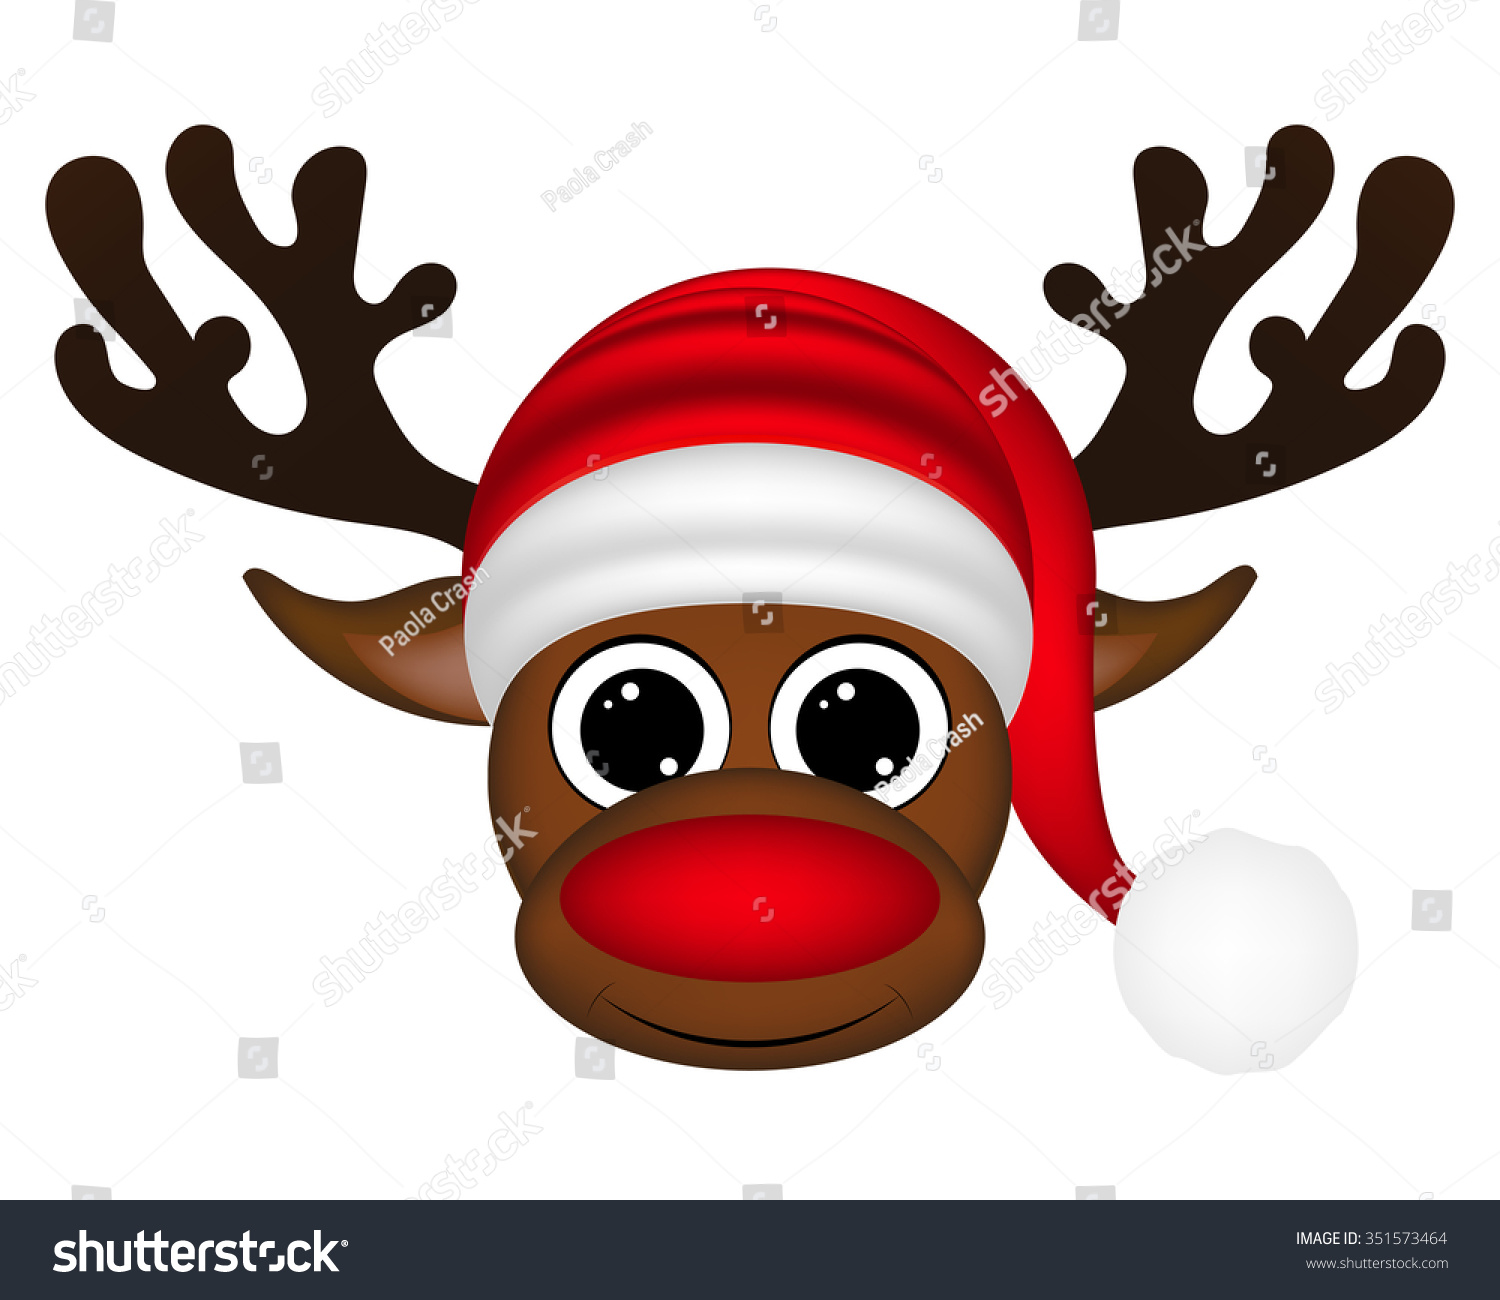 Reindeer On A White Background Stock Vector Illustration 351573464 ...